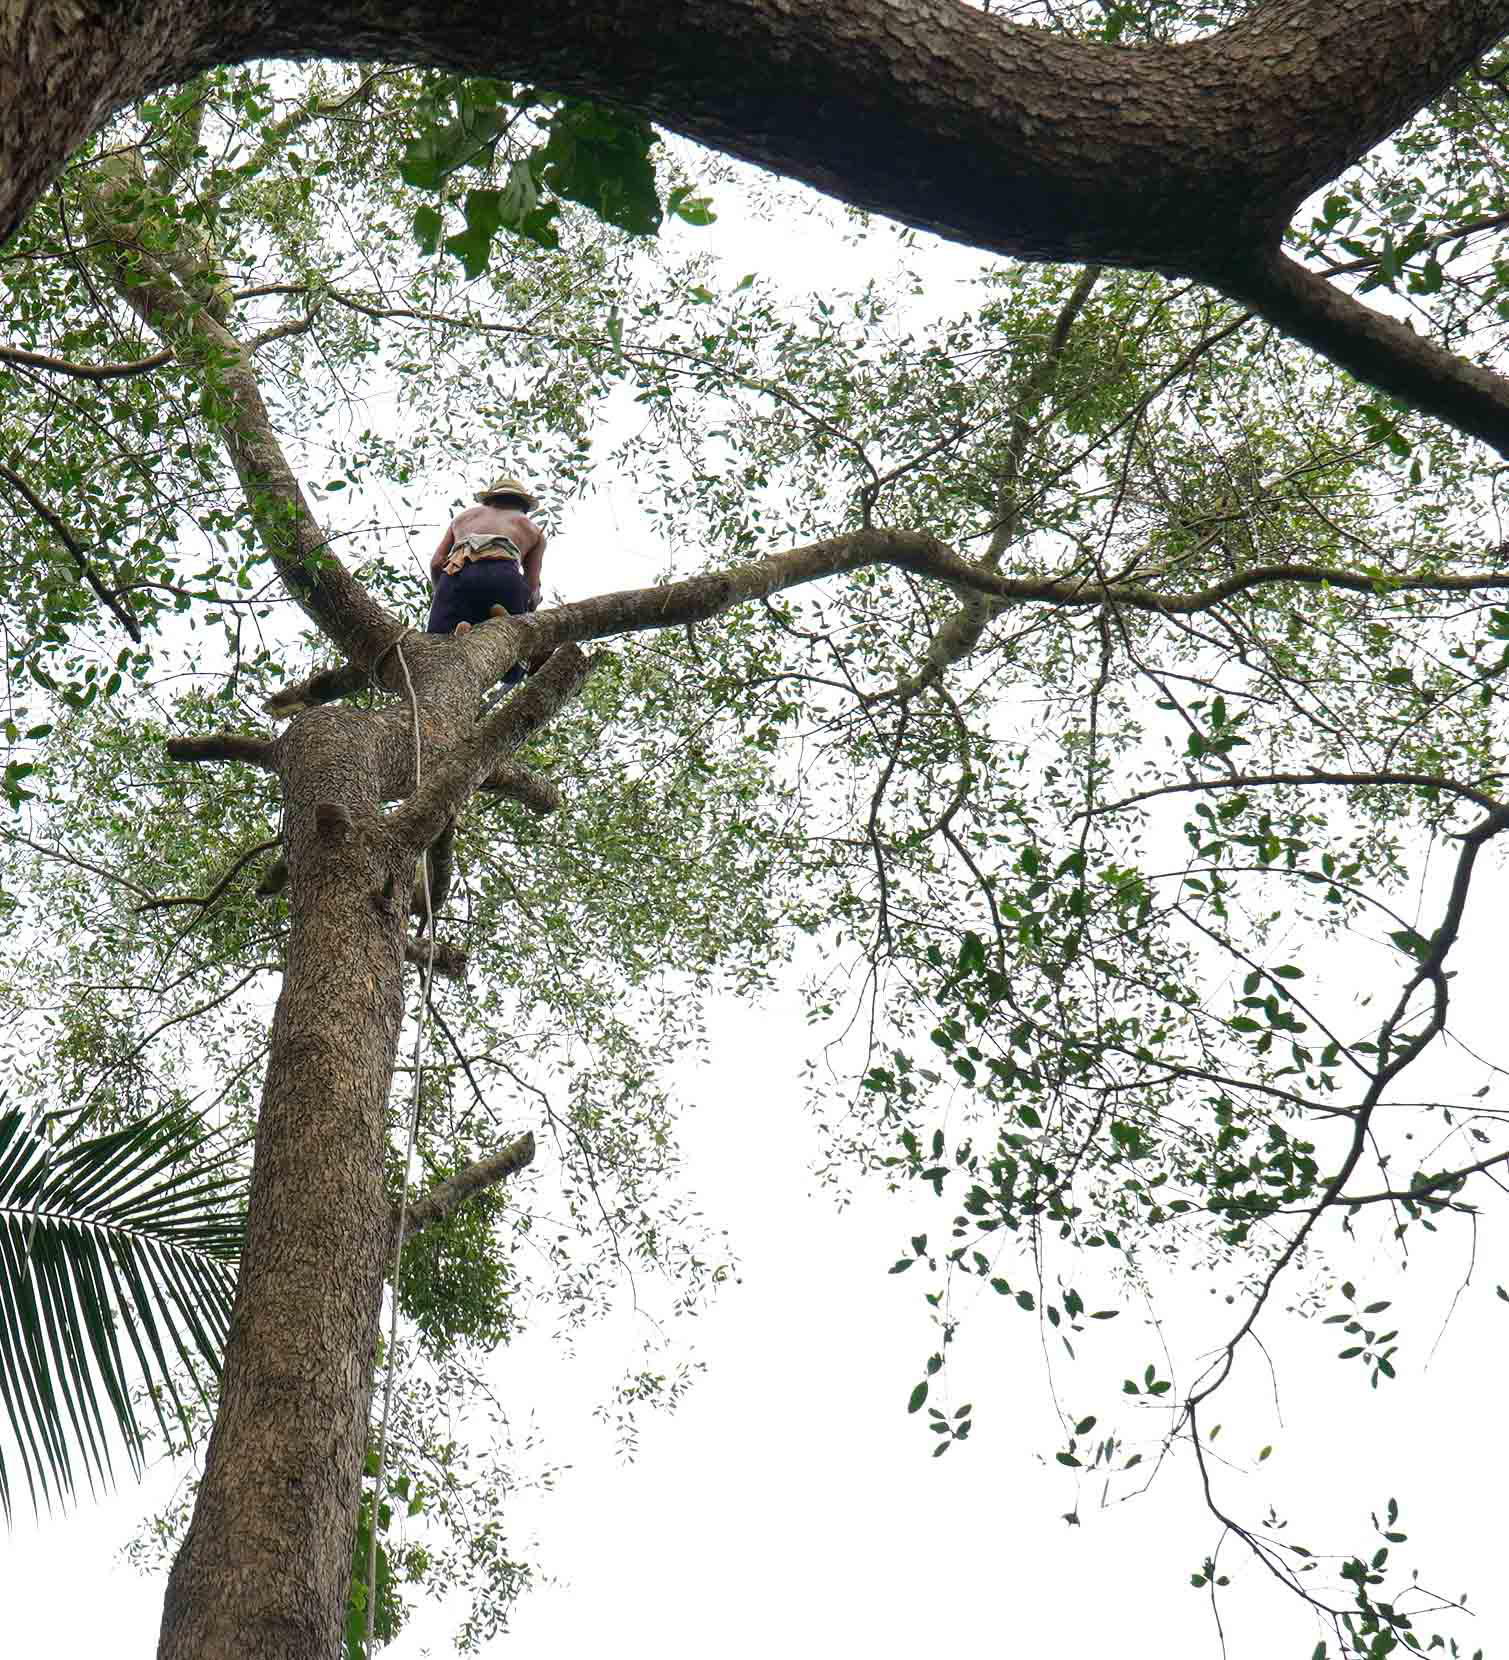 Pham Thanh Tung climbs on a tree to cut it down with his chainsaw. Photo: Mau Truong / Tuoi Tre